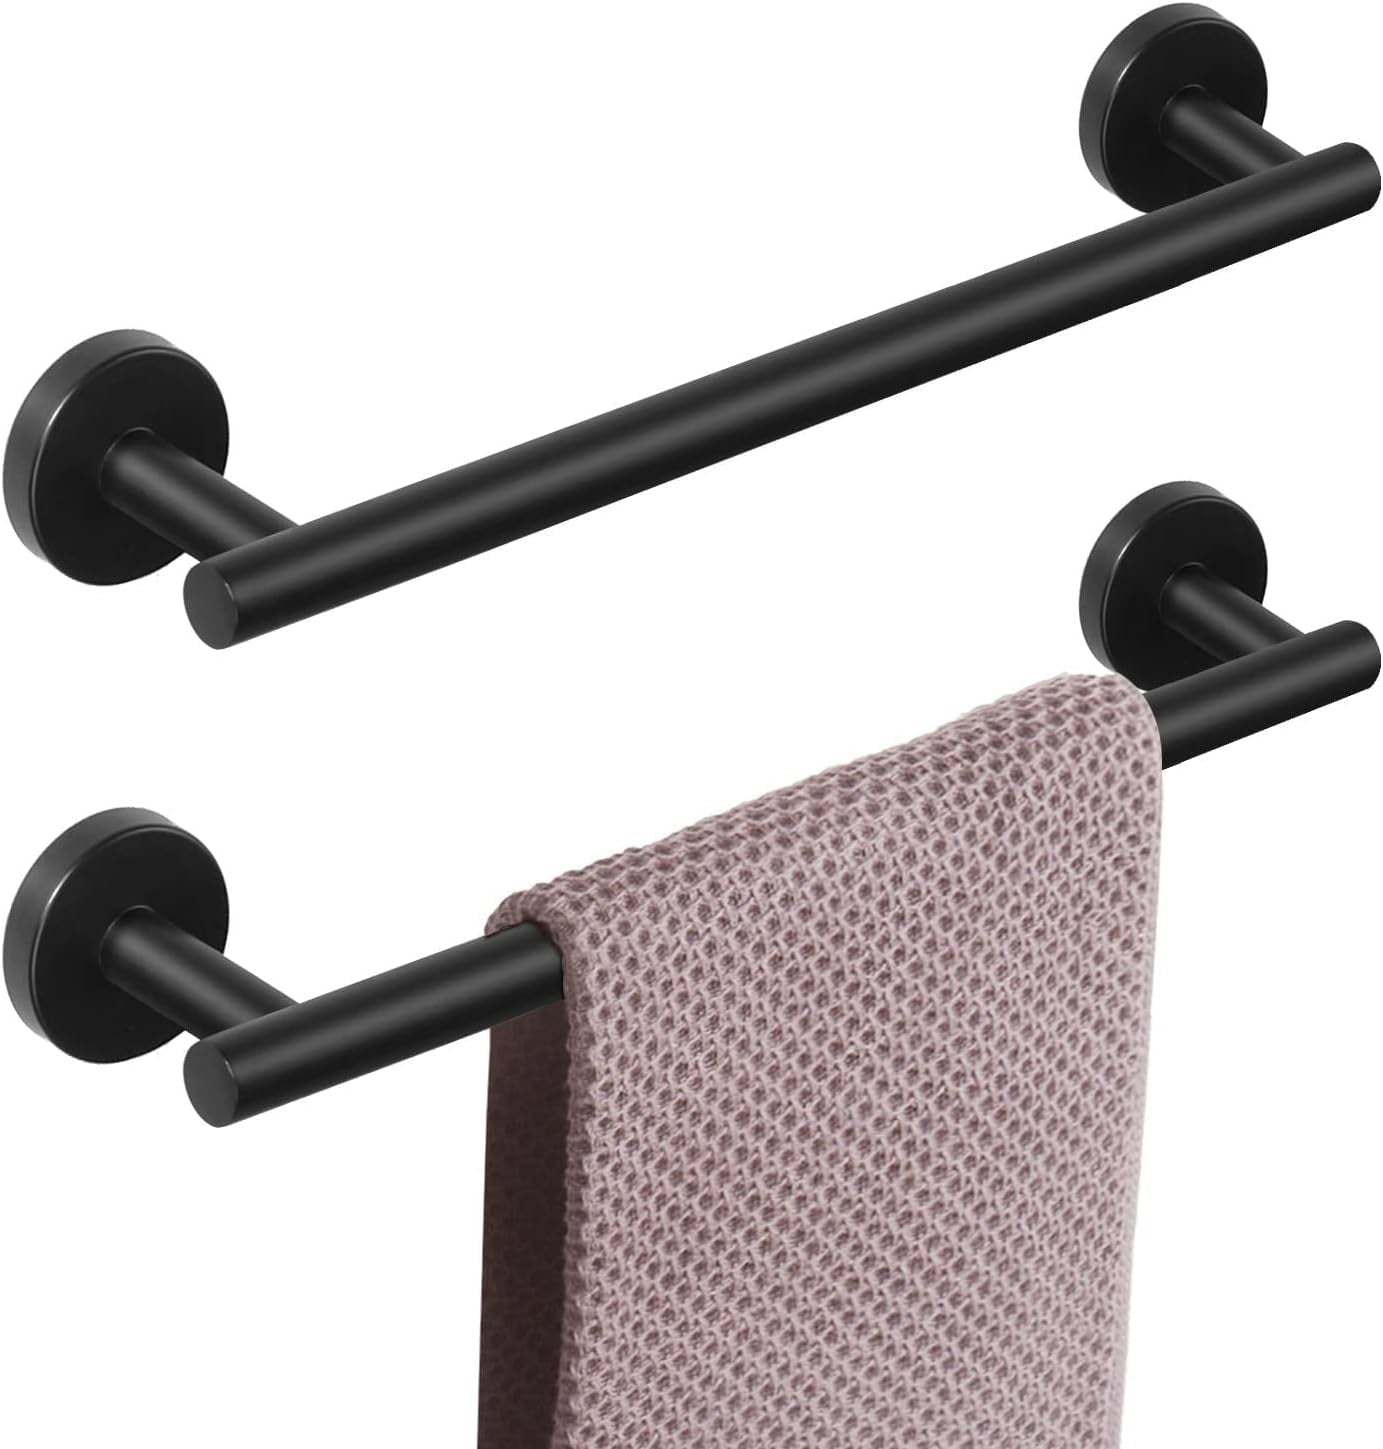 Bathroom Towel Bar, Bath Accessories Thicken Stainless Steel Shower Towel Rack for Bathroom, Towel Holder Wall Mounted (2 Pack, Matte Black, 16 Inch)